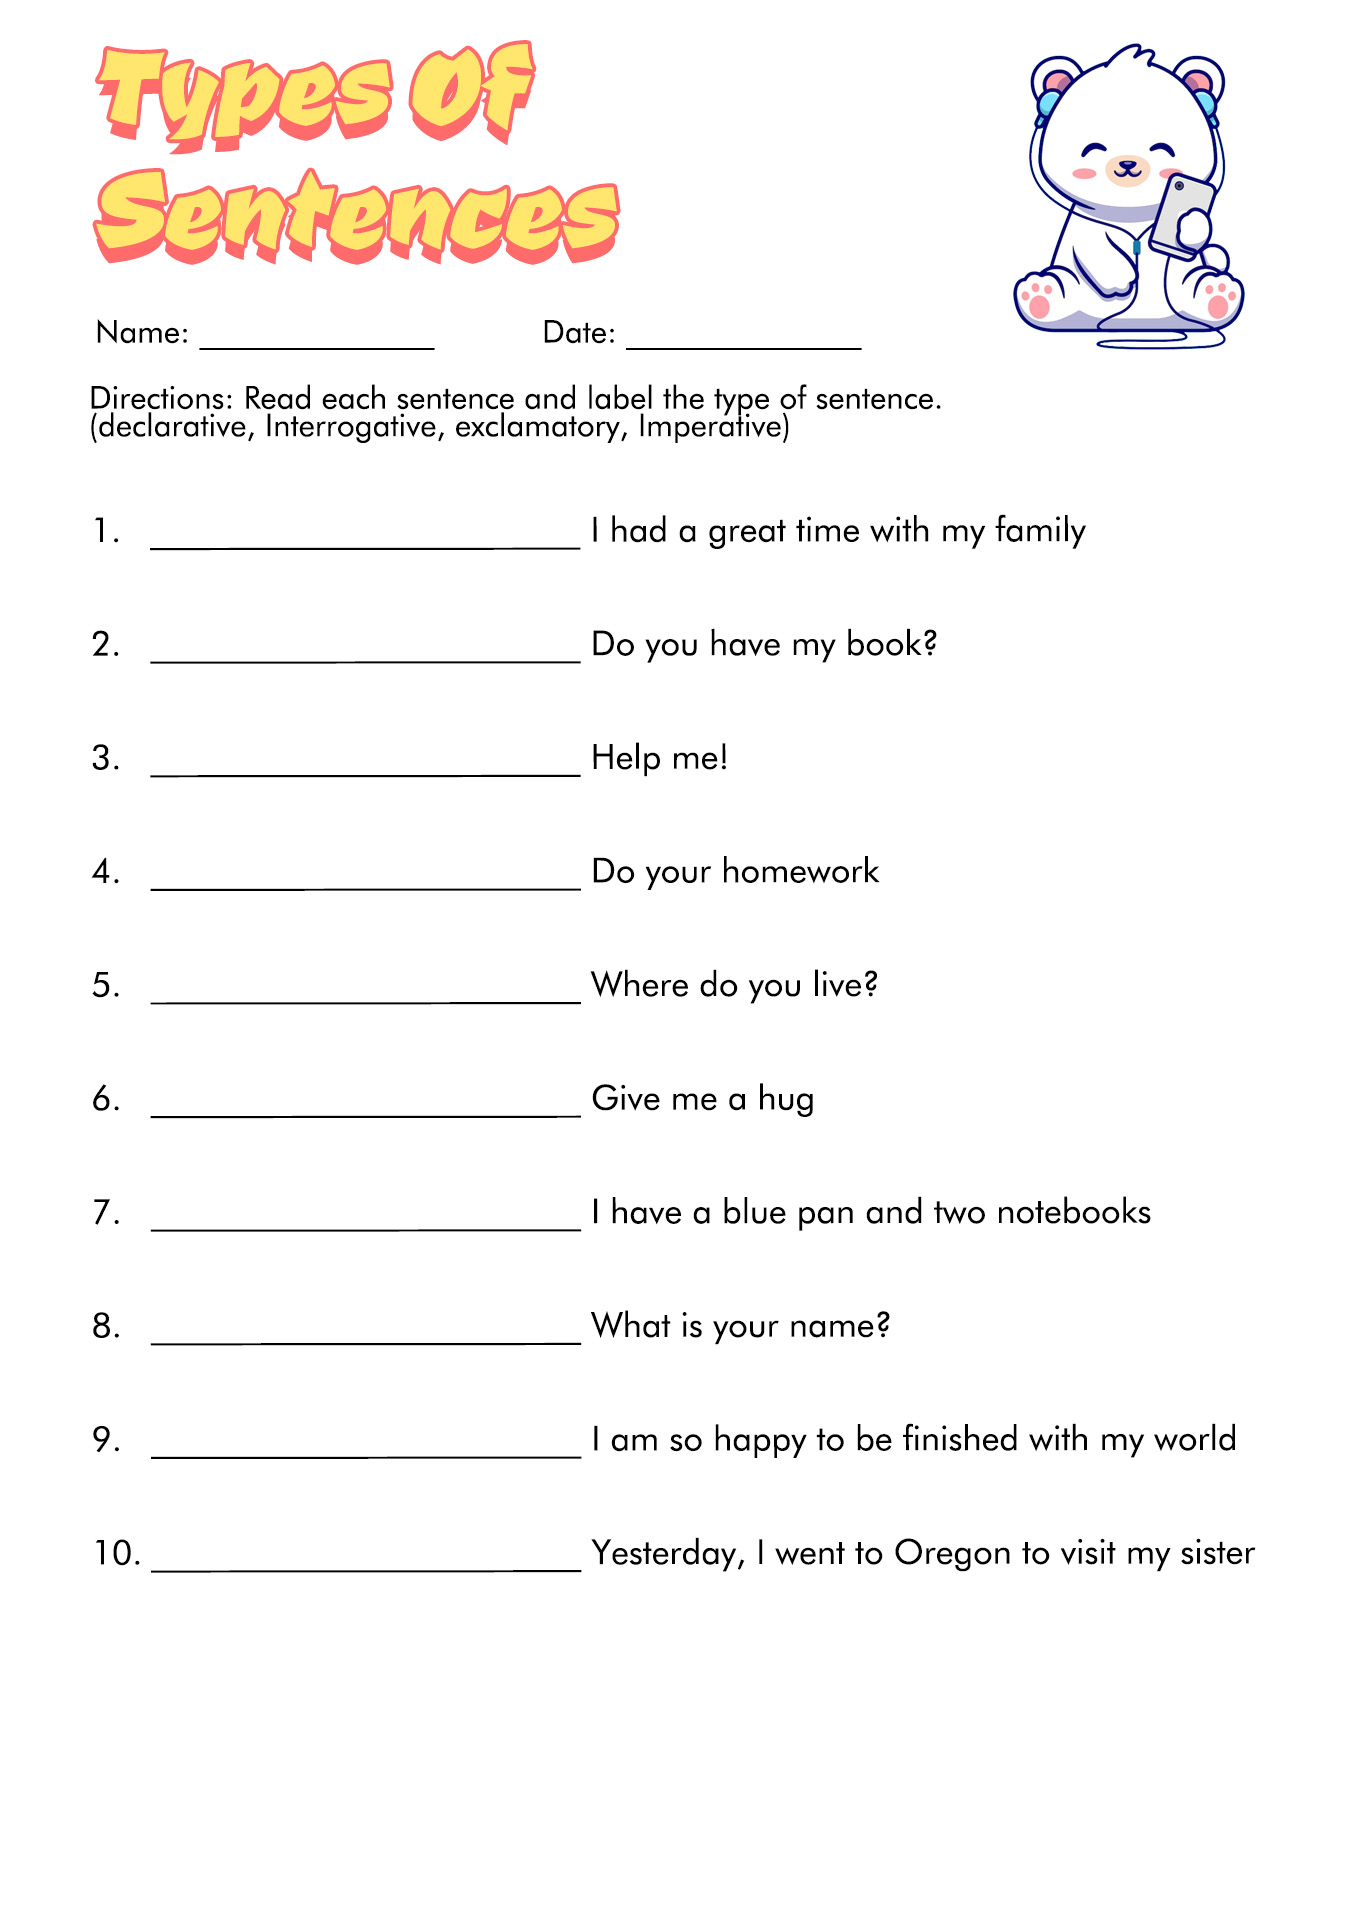 types-of-sentences-exercises-for-class-4-cbse-with-answers